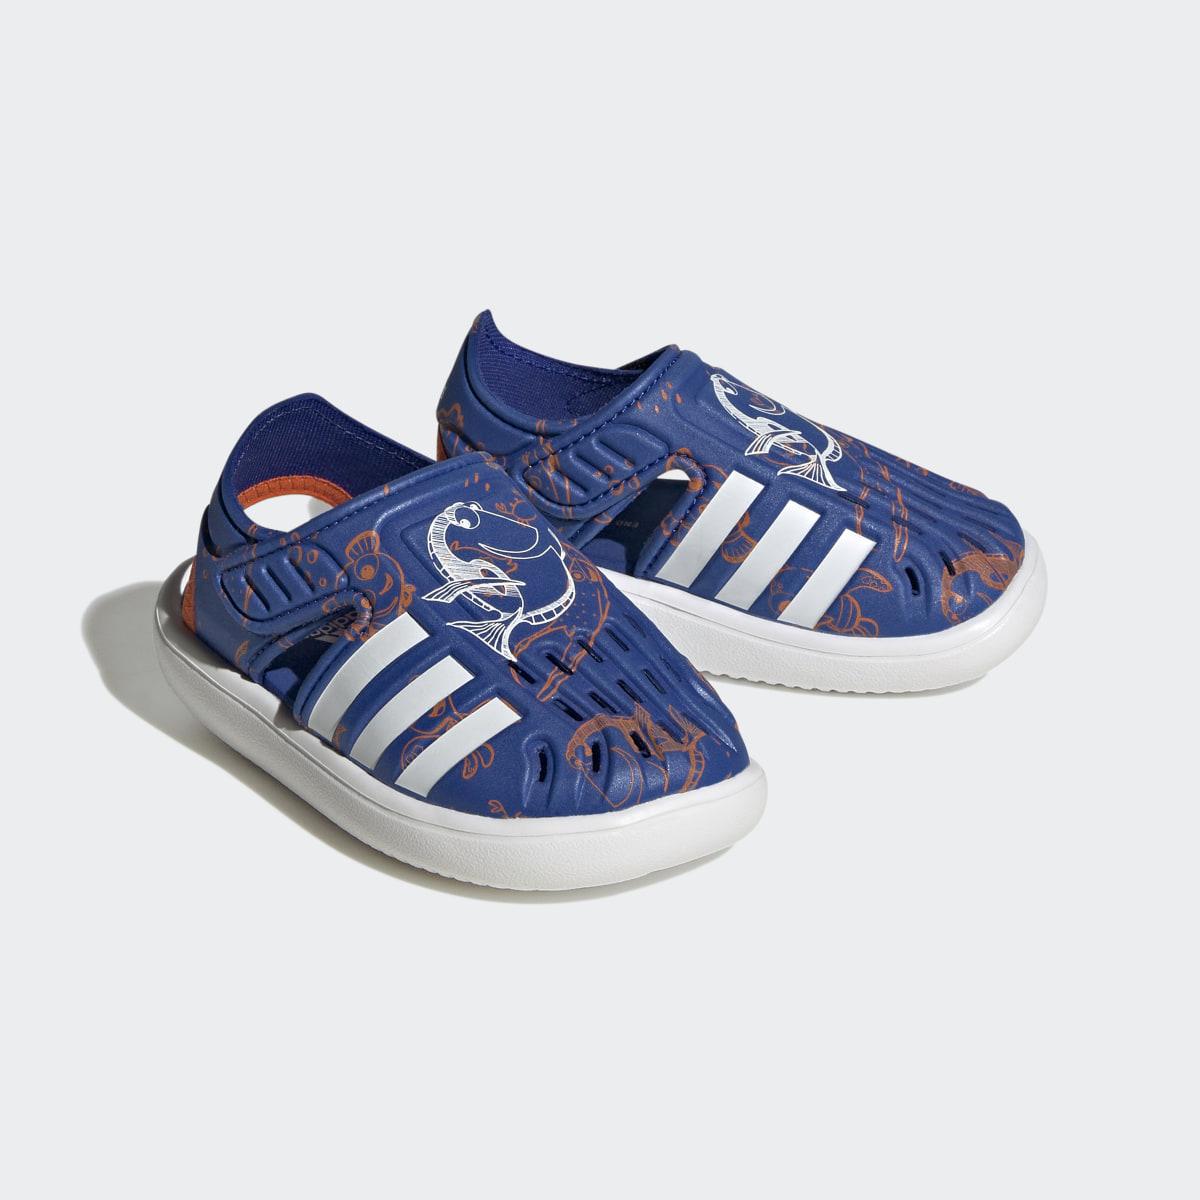 Adidas Finding Nemo and Dory Closed Toe Summer Water Sandals. 5